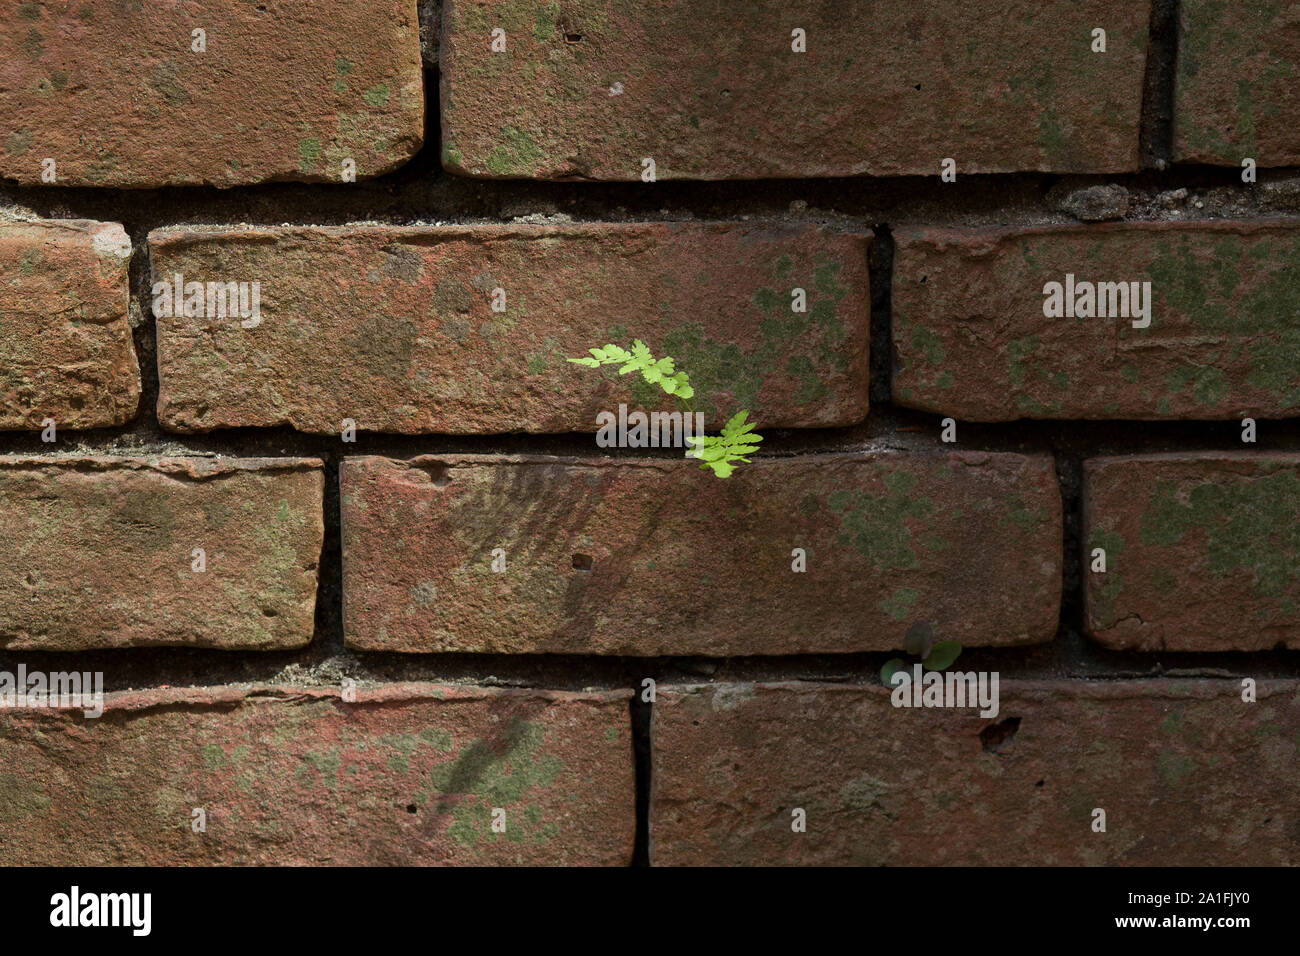 A tiny fern maintains a foothold on a brick wall. Stock Photo